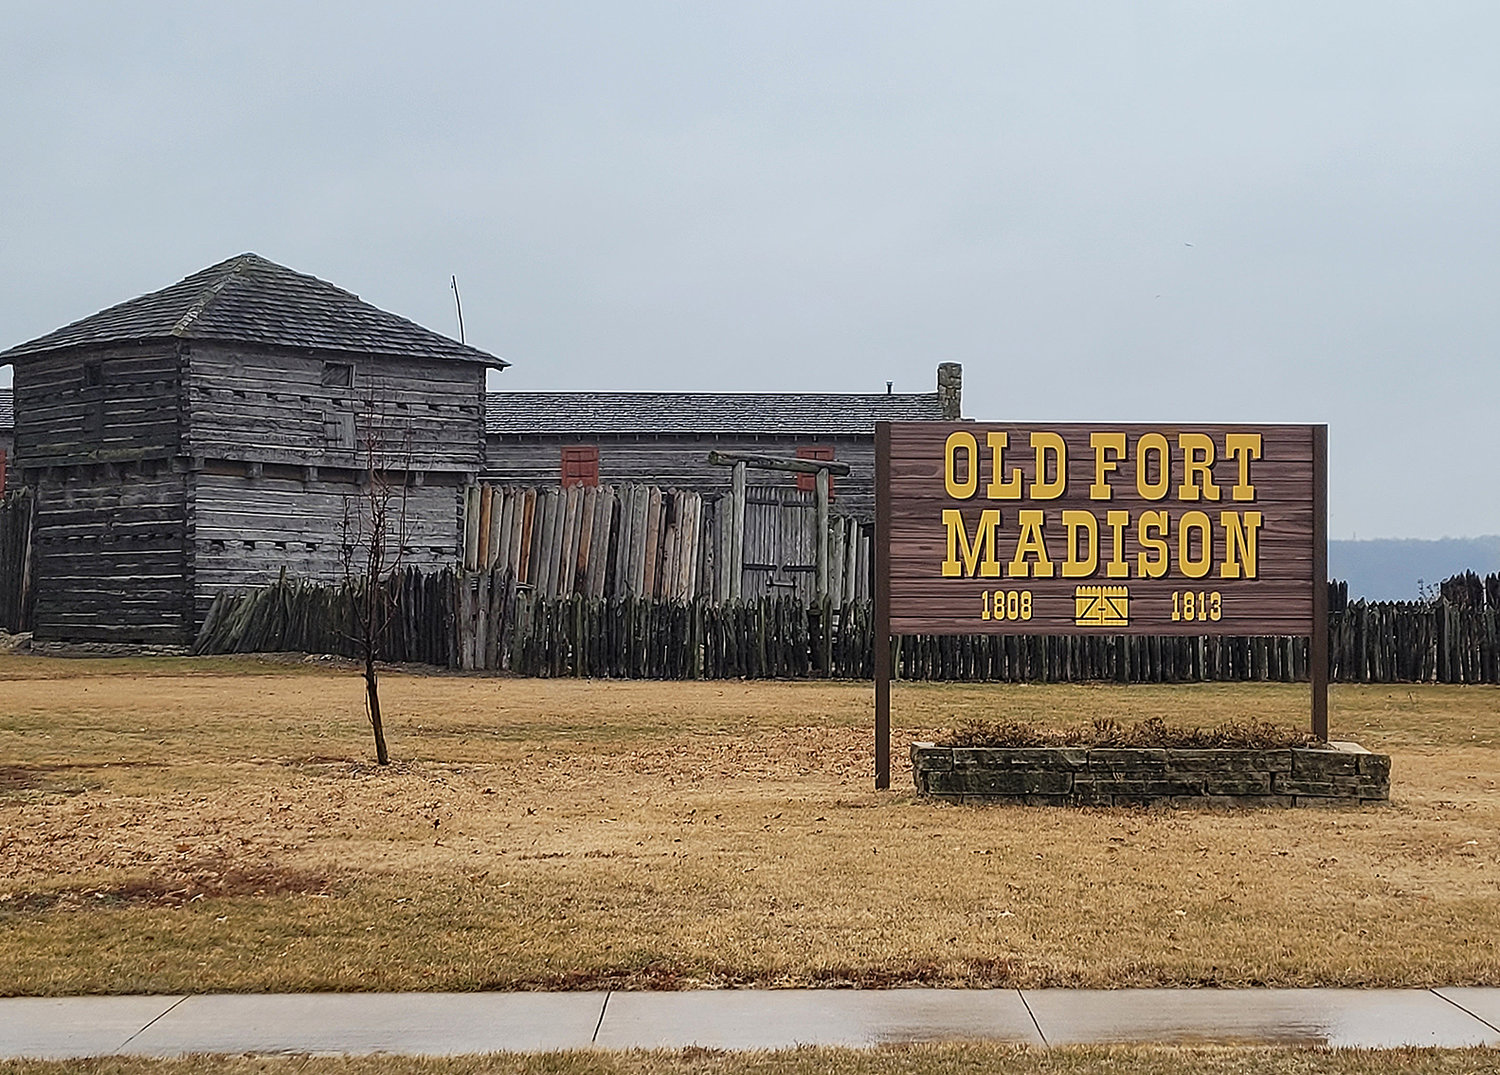 Officials are saying an announcement that the Old Fort is to be closed are premature and the Fort Madison City Council has made no decision on the future of the facility.